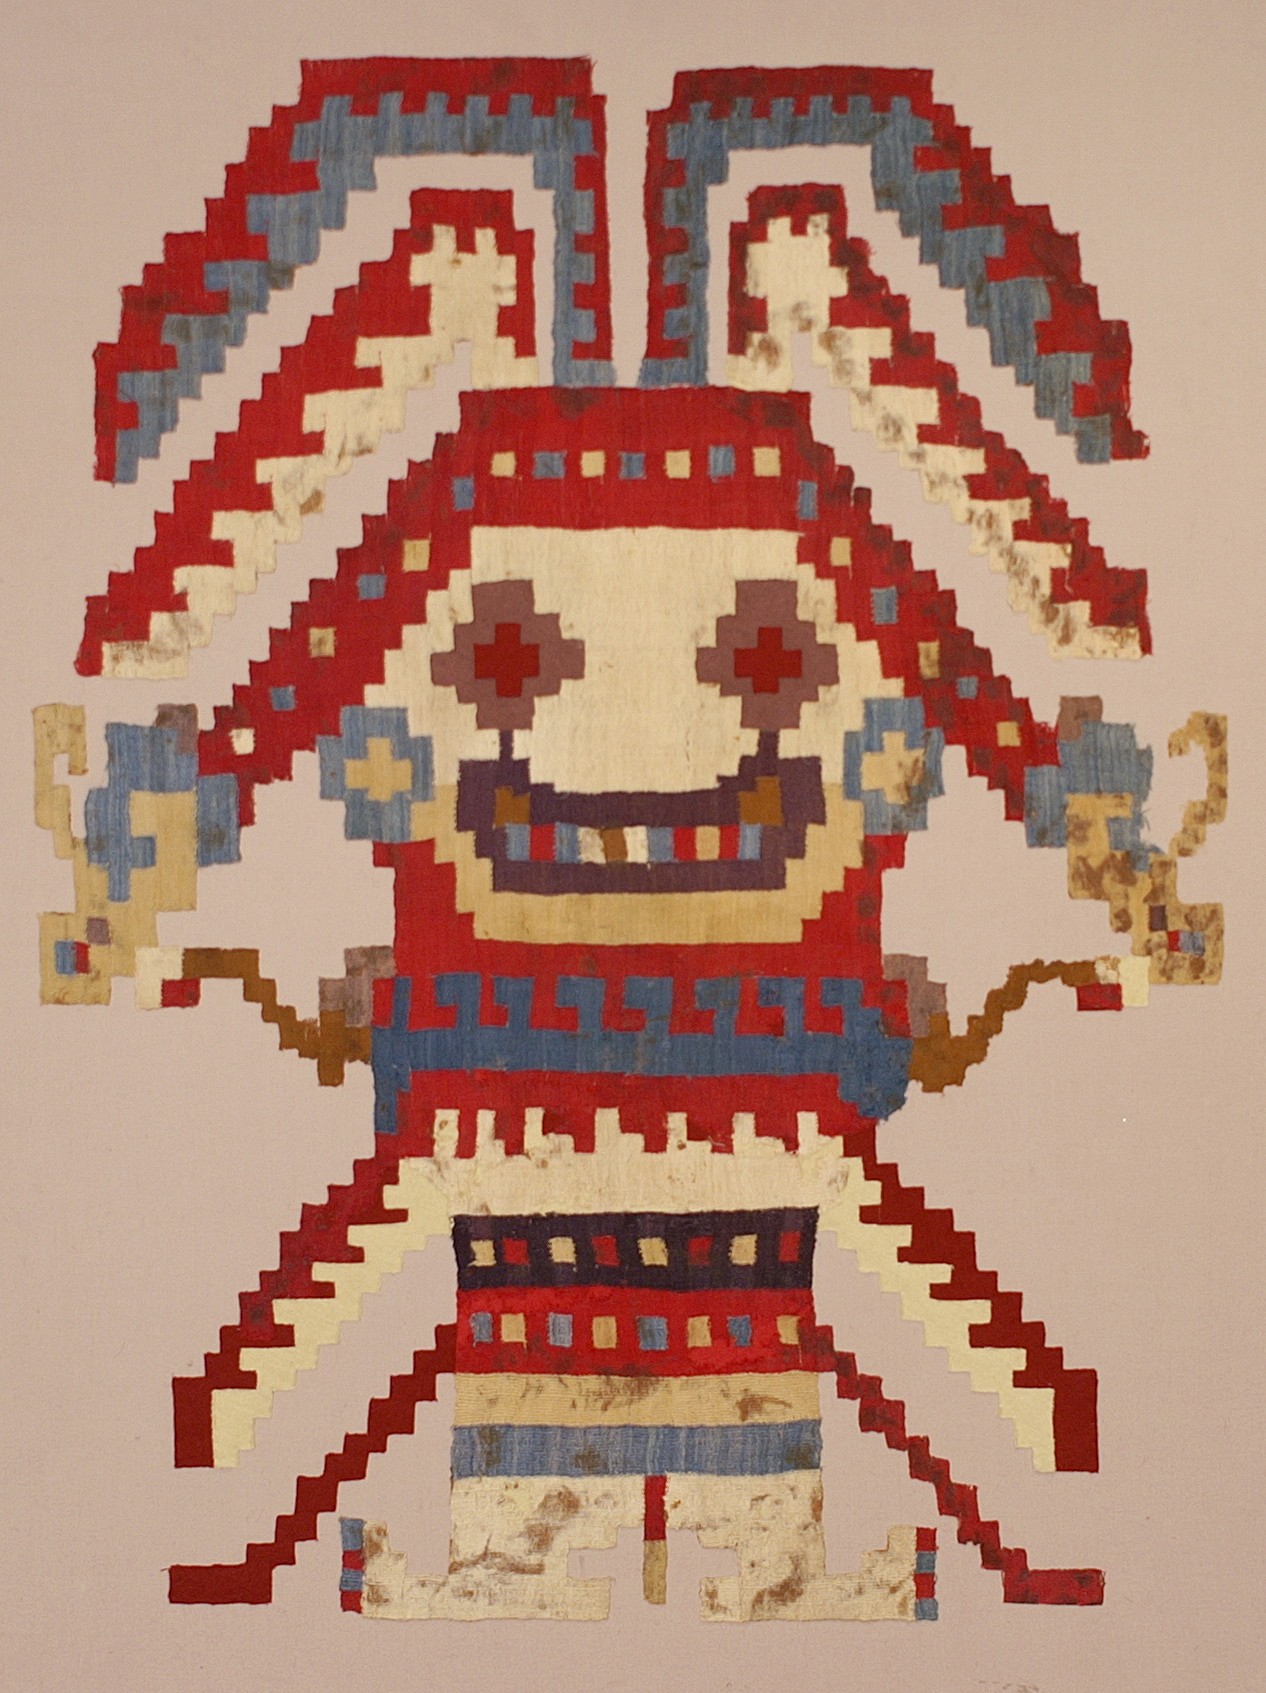 Peru, Huarmey Tapestry deity with rayed headdress
This is a very large single figure for any Peruvian weaving, and it was originally attached to a mantle of sheer cotton. The figure wears a headdress, ear spools, necklace, and tunic with a serpent belt in the red, blue and ivory colors typical of Huarmey textiles. The Huarmey Valley is the most southern in the Moche area and had, therefore, a lot of Wari influence in its art. This figure is stylistically more Wari than Moche in its abstract appearance.
Media: Textile
Dimensions: Length 32" x Width 24"
Price Upon Request
92305